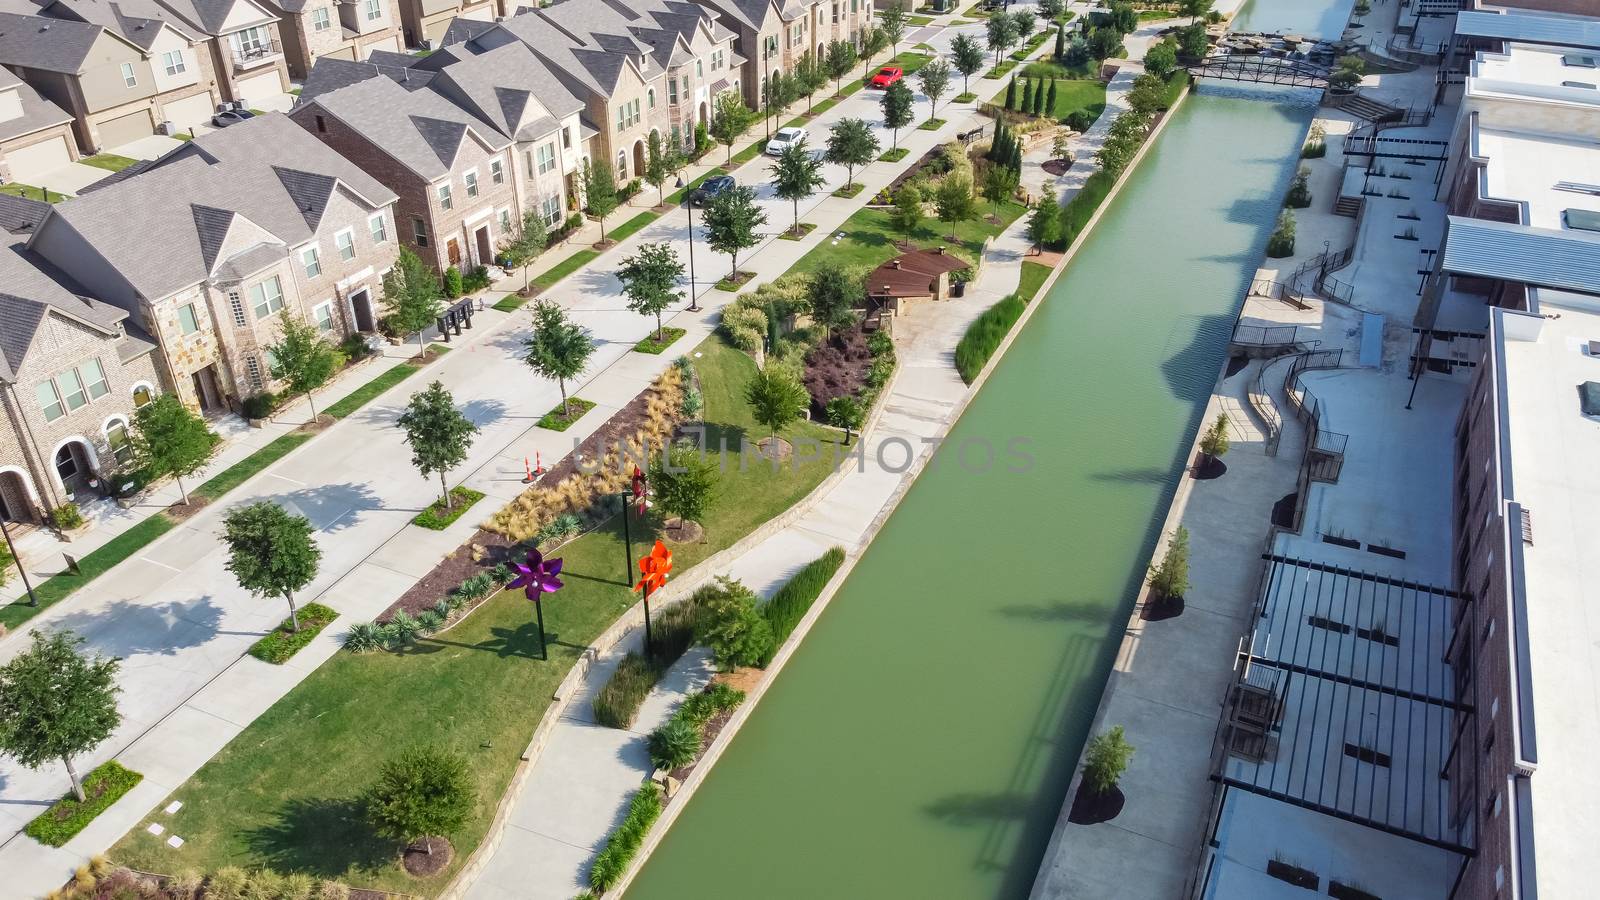 Aerial view riverside townhouses and mall strips along canal in Flower Mound, Texas, USA by trongnguyen